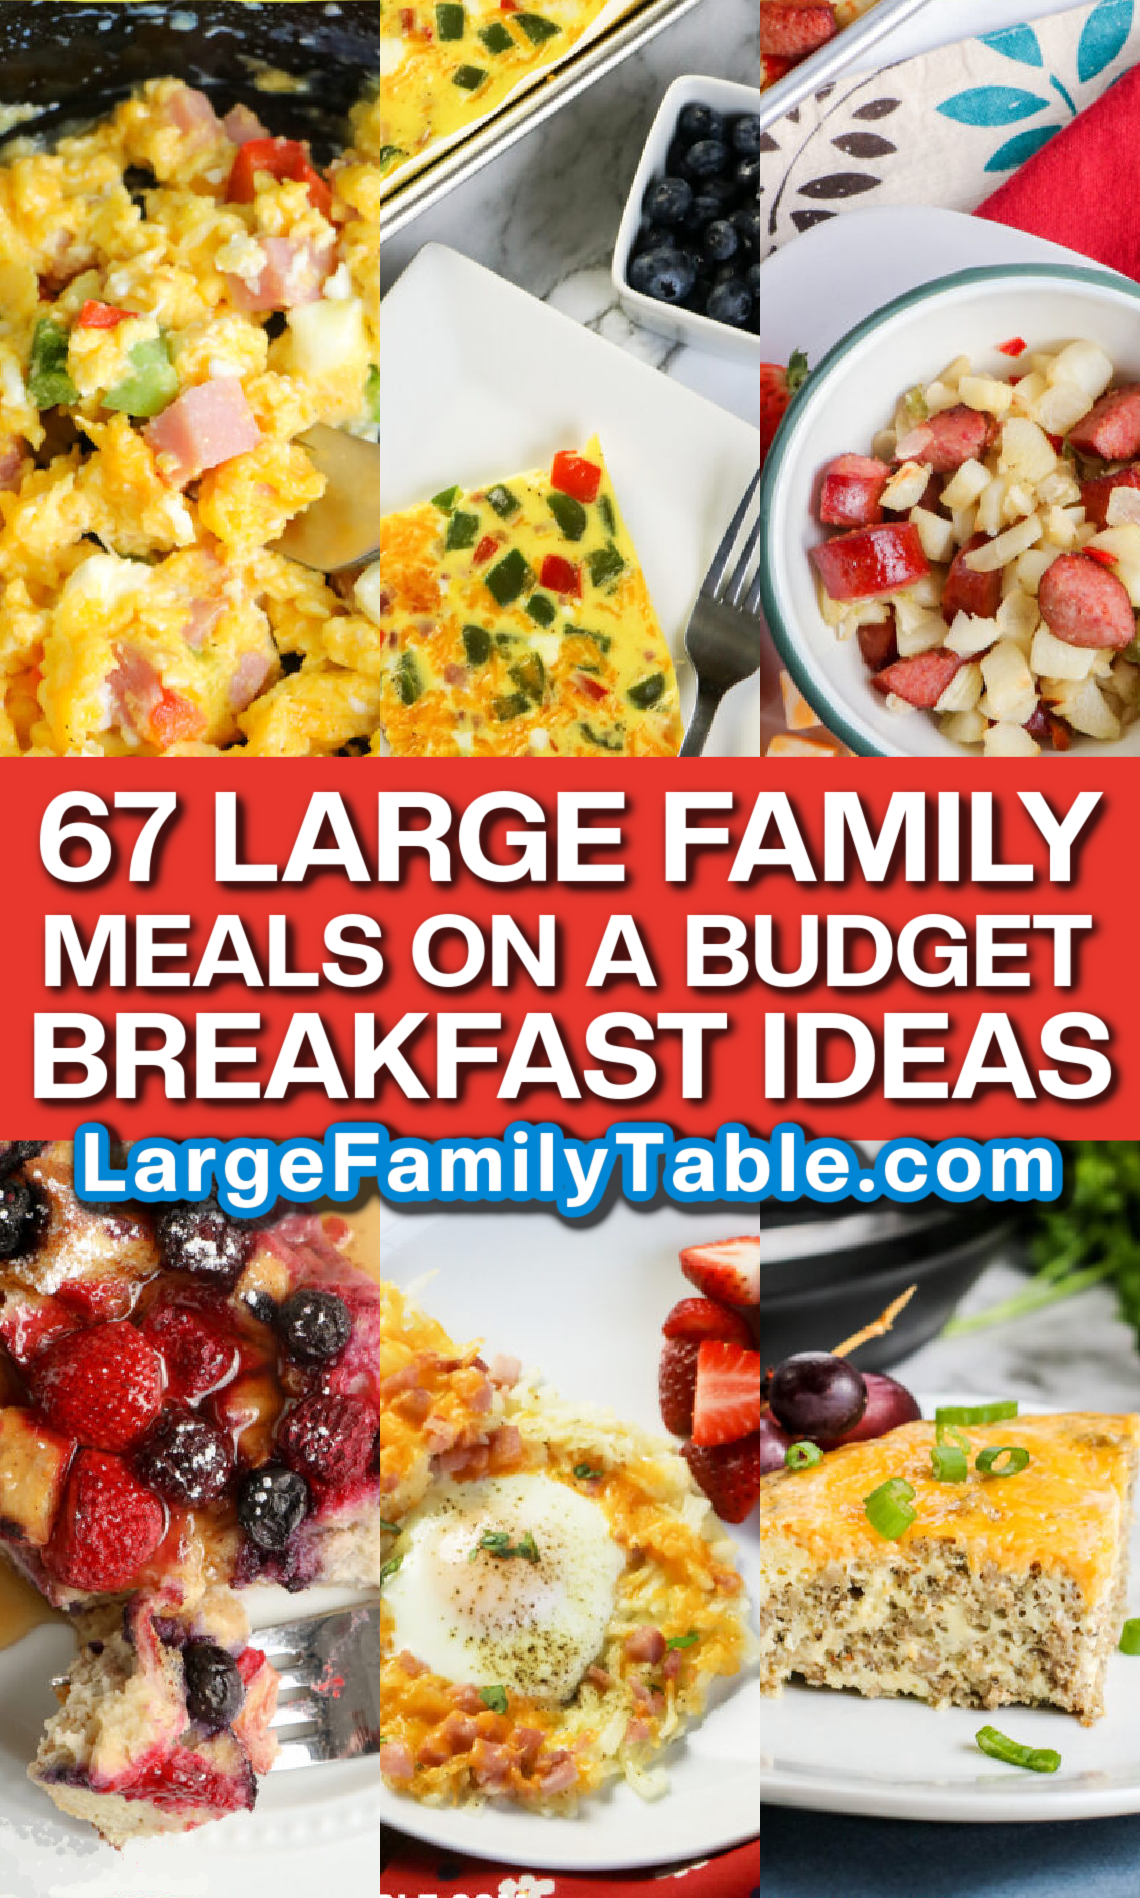 67 Large Family Meals on a Budget Breakfast Ideas LargefamilyTable.com